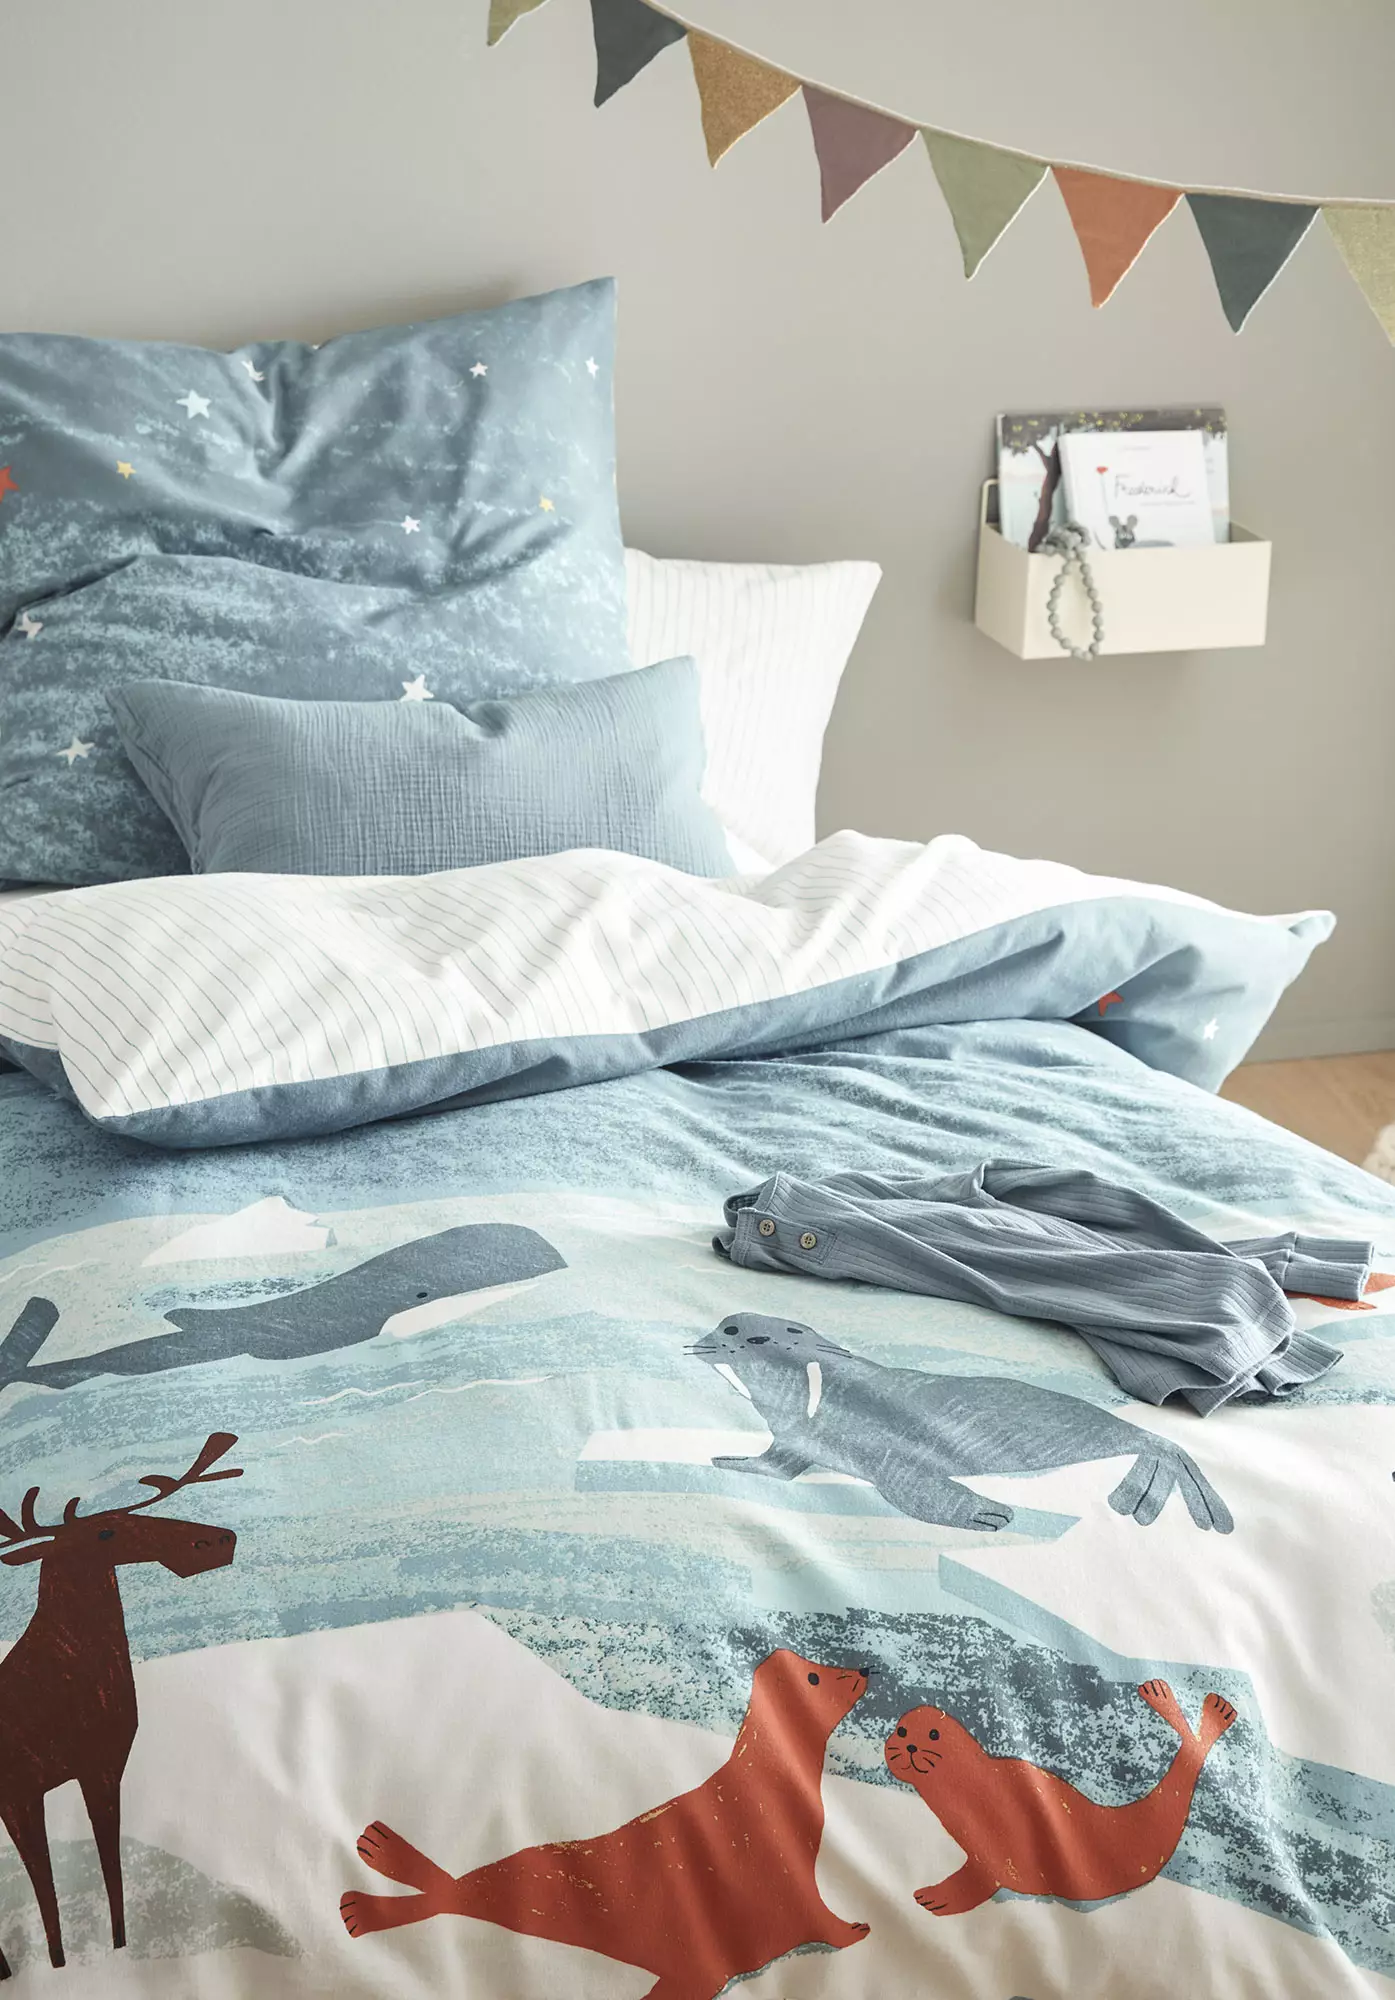 Beaver bed linen made from pure organic cotton - 0